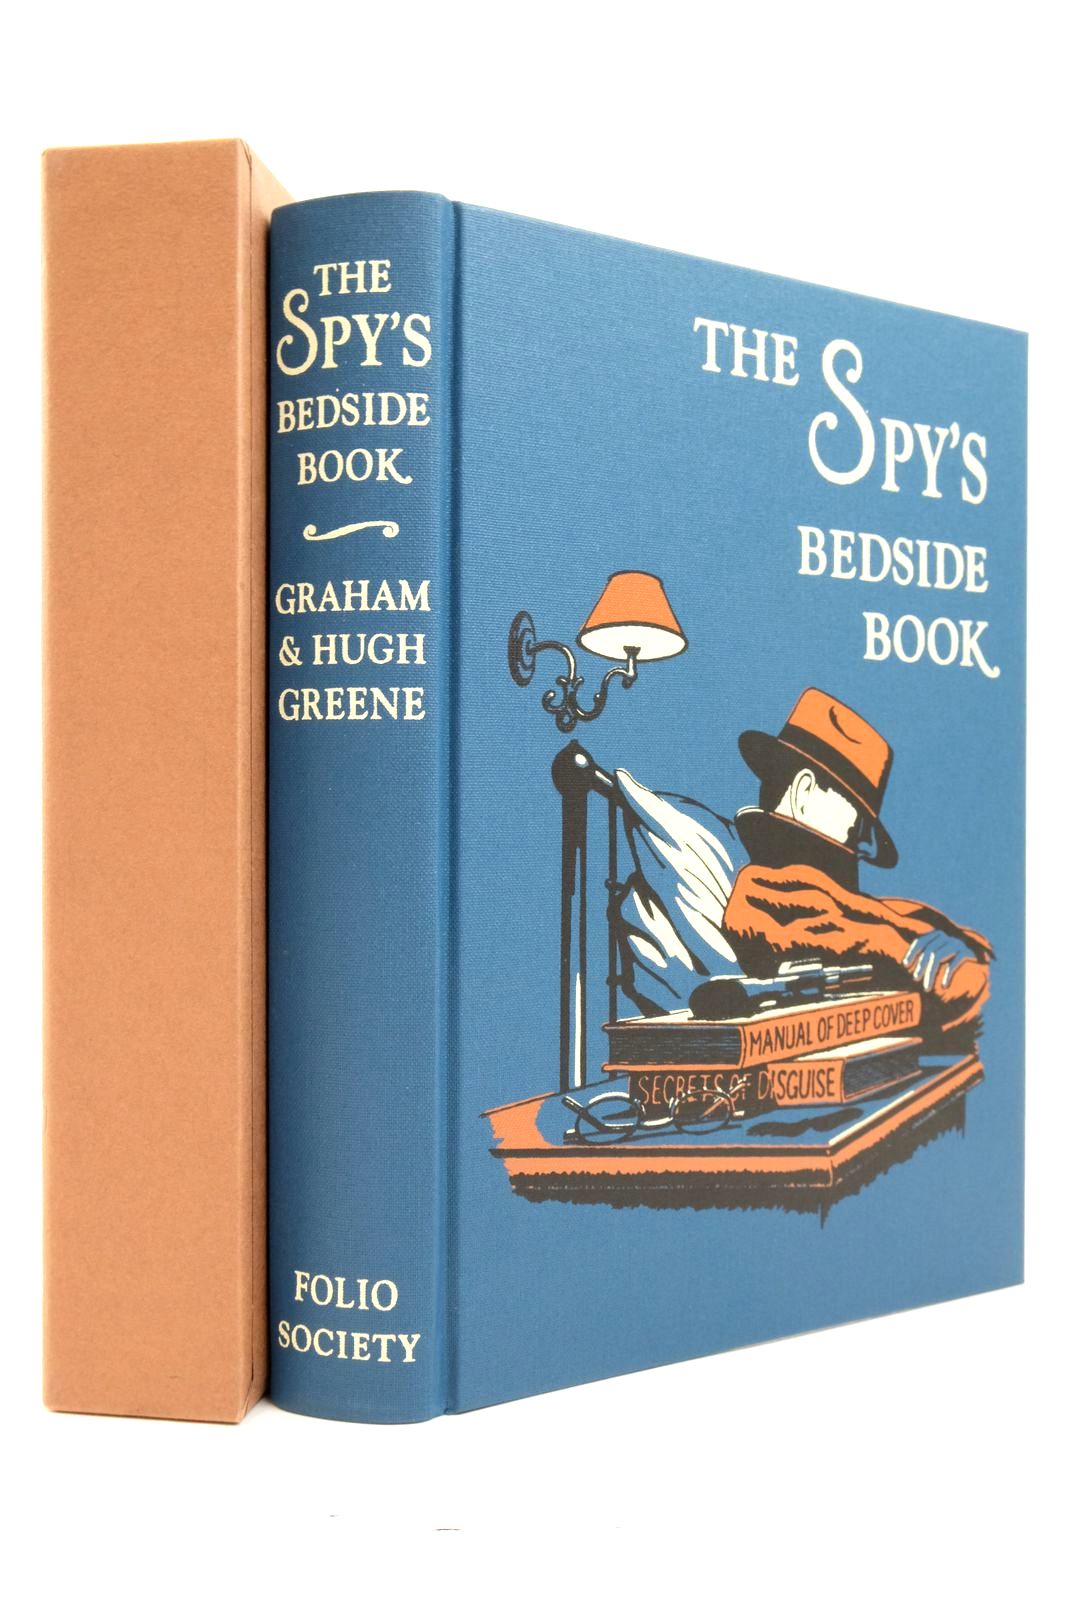 Photo of THE SPY'S BEDSIDE BOOK written by Greene, Graham
Greene, Hugh
Rimington, Stella illustrated by Hardcastle, Nick published by Folio Society (STOCK CODE: 2137159)  for sale by Stella & Rose's Books